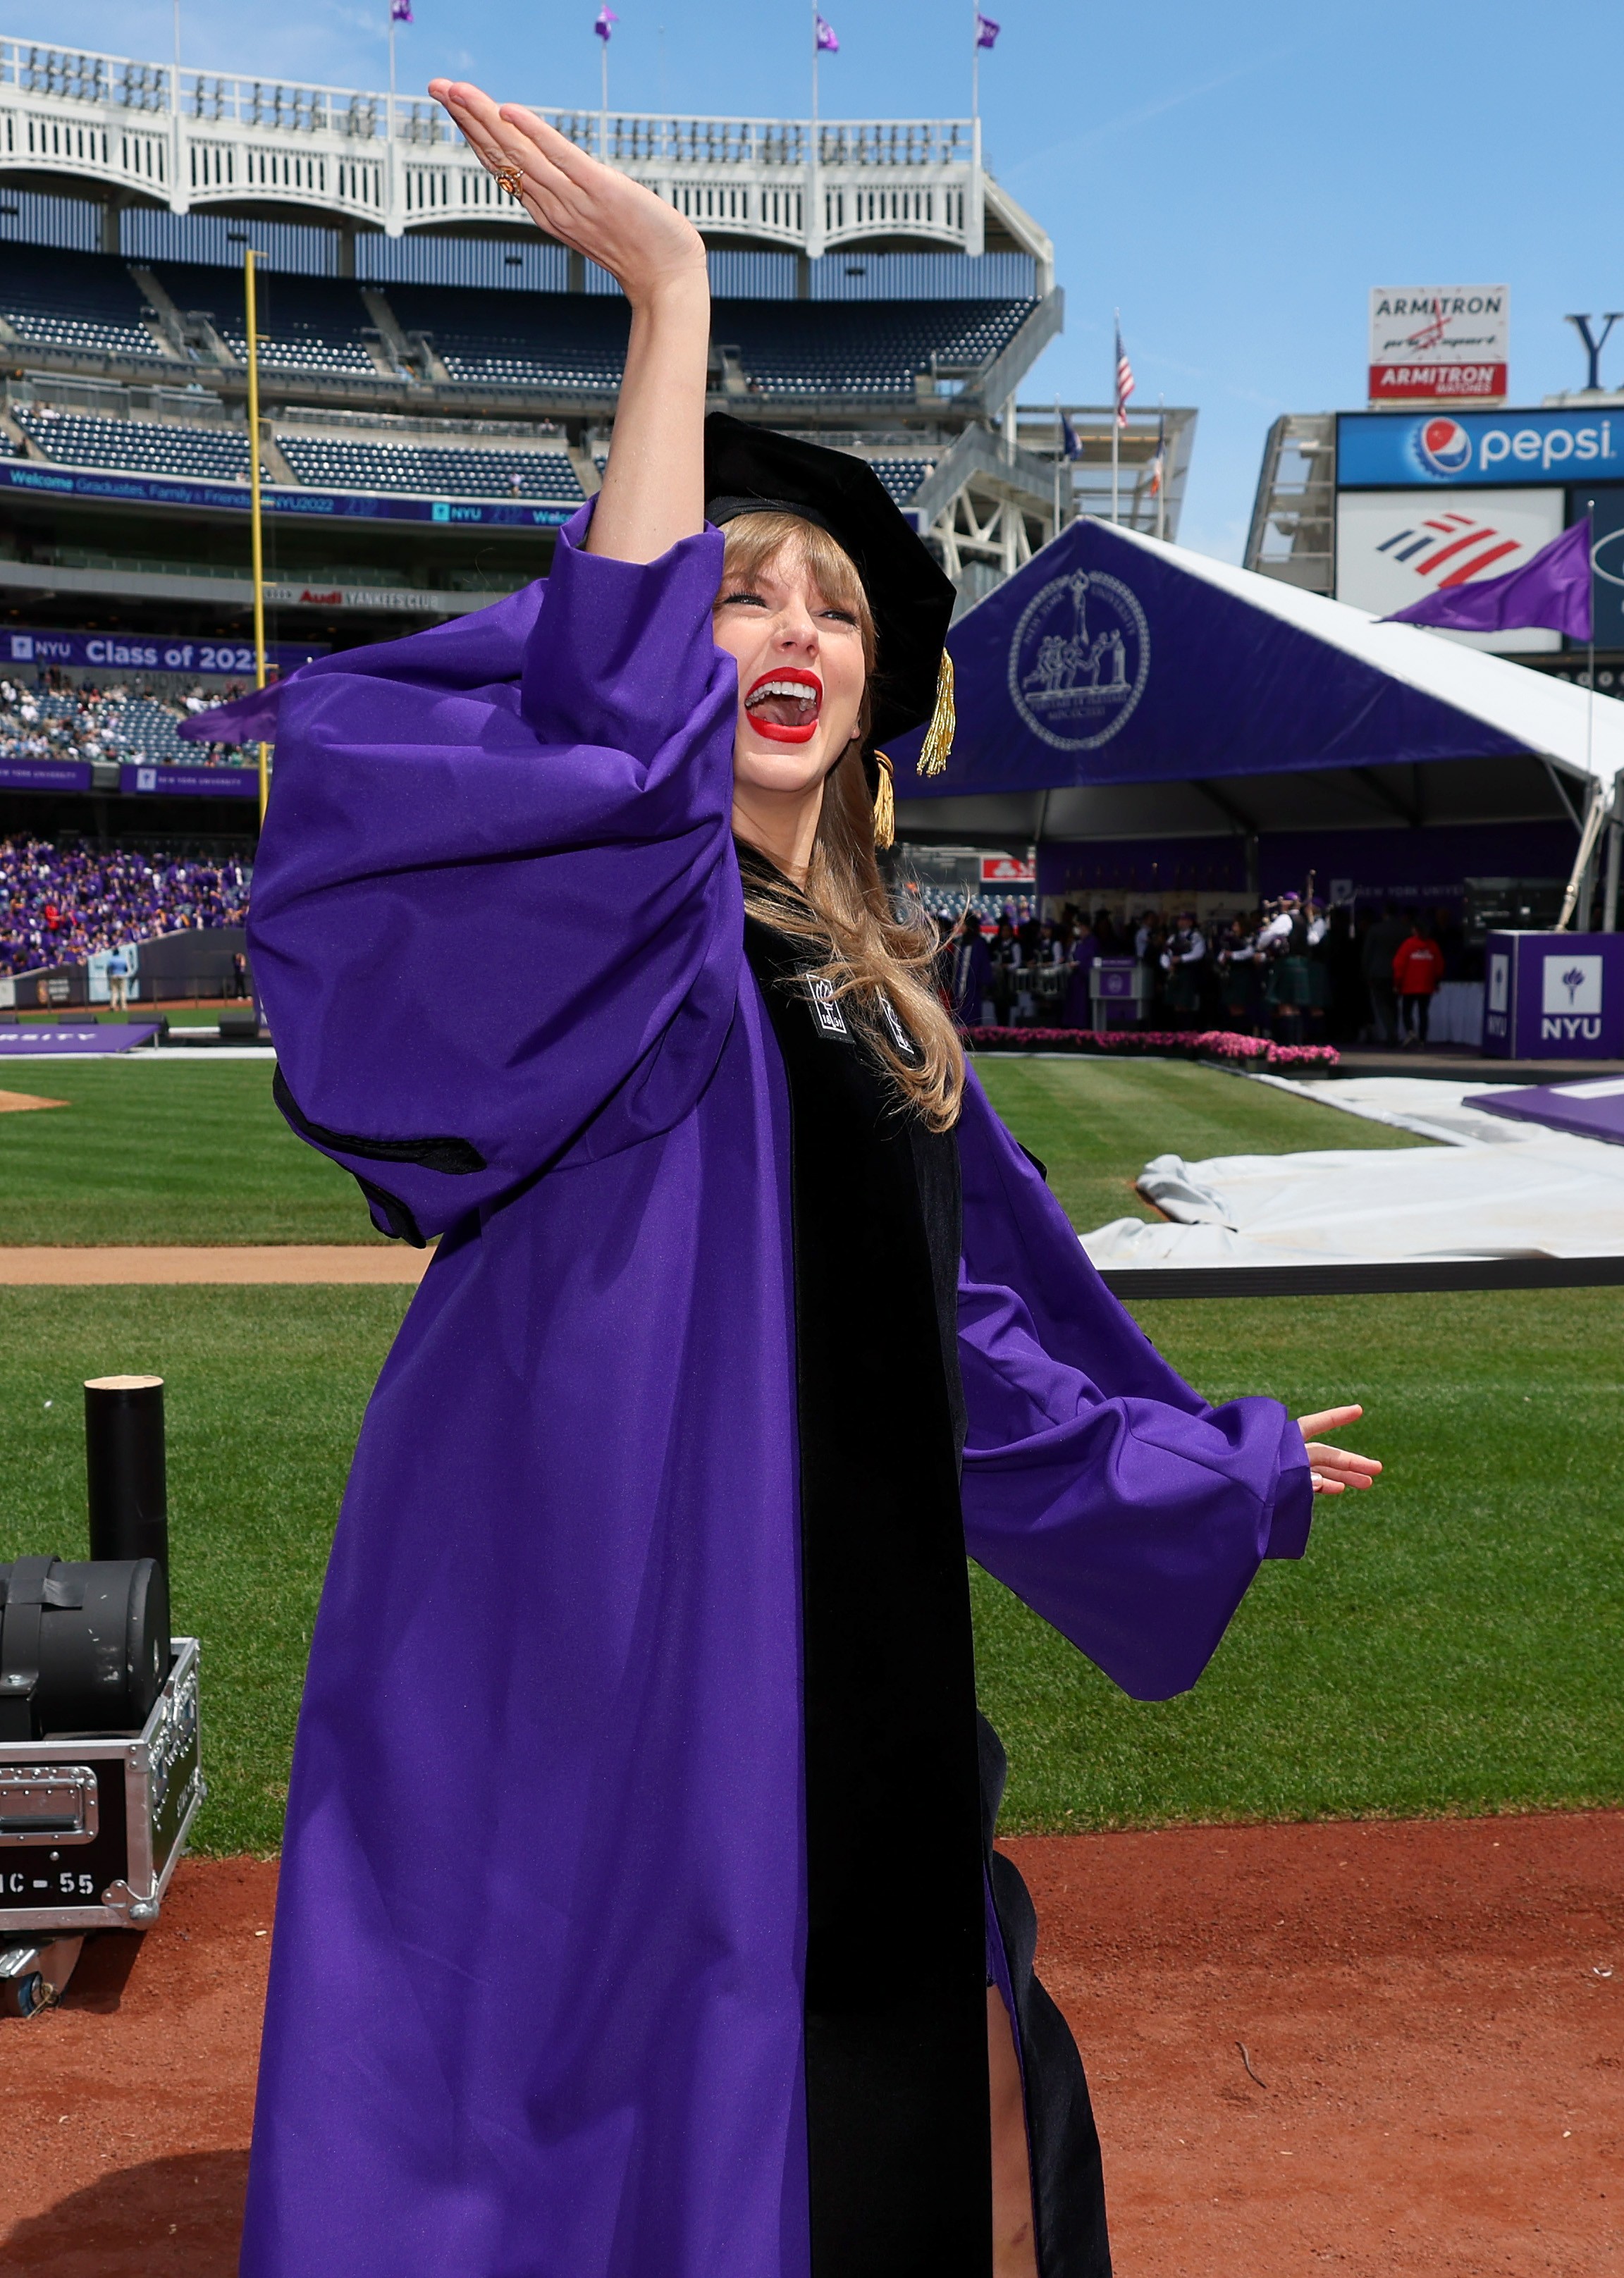 NEW YORK, NEW YORK - MAY 18: Taylor Swift arrives to deliver the New York University 2022 Commencement Address at Yankee Stadium on May 18, 2022 in New York City. (Photo by Dia Dipasupil/Getty Images) (Foto: Getty Images)